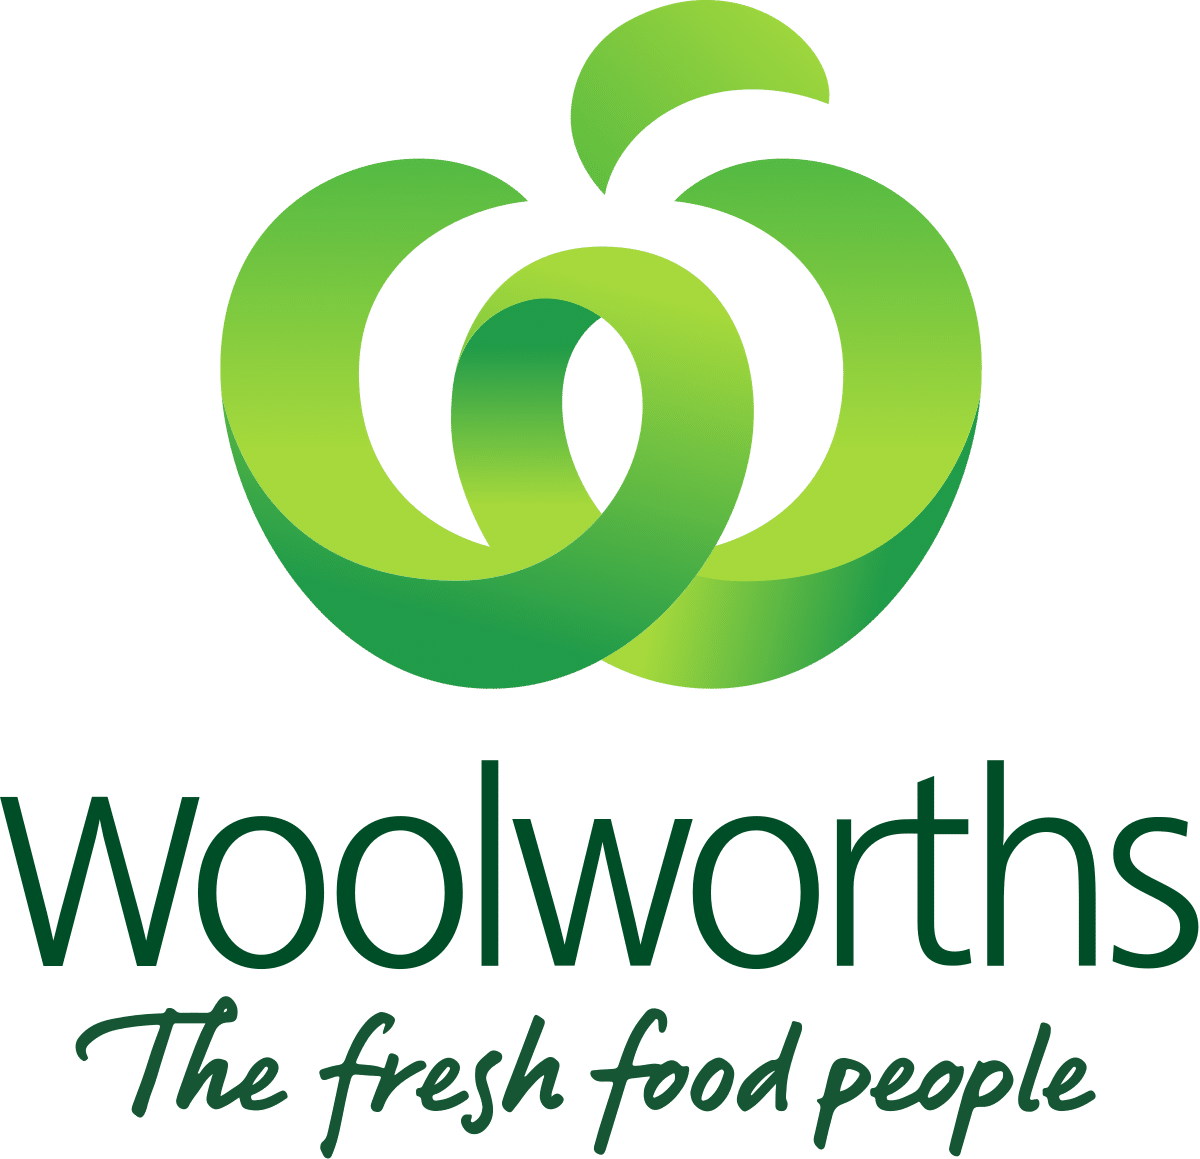 Woolworths Logo - The Fresh Food People: A Multifaceted Grocery Retailer